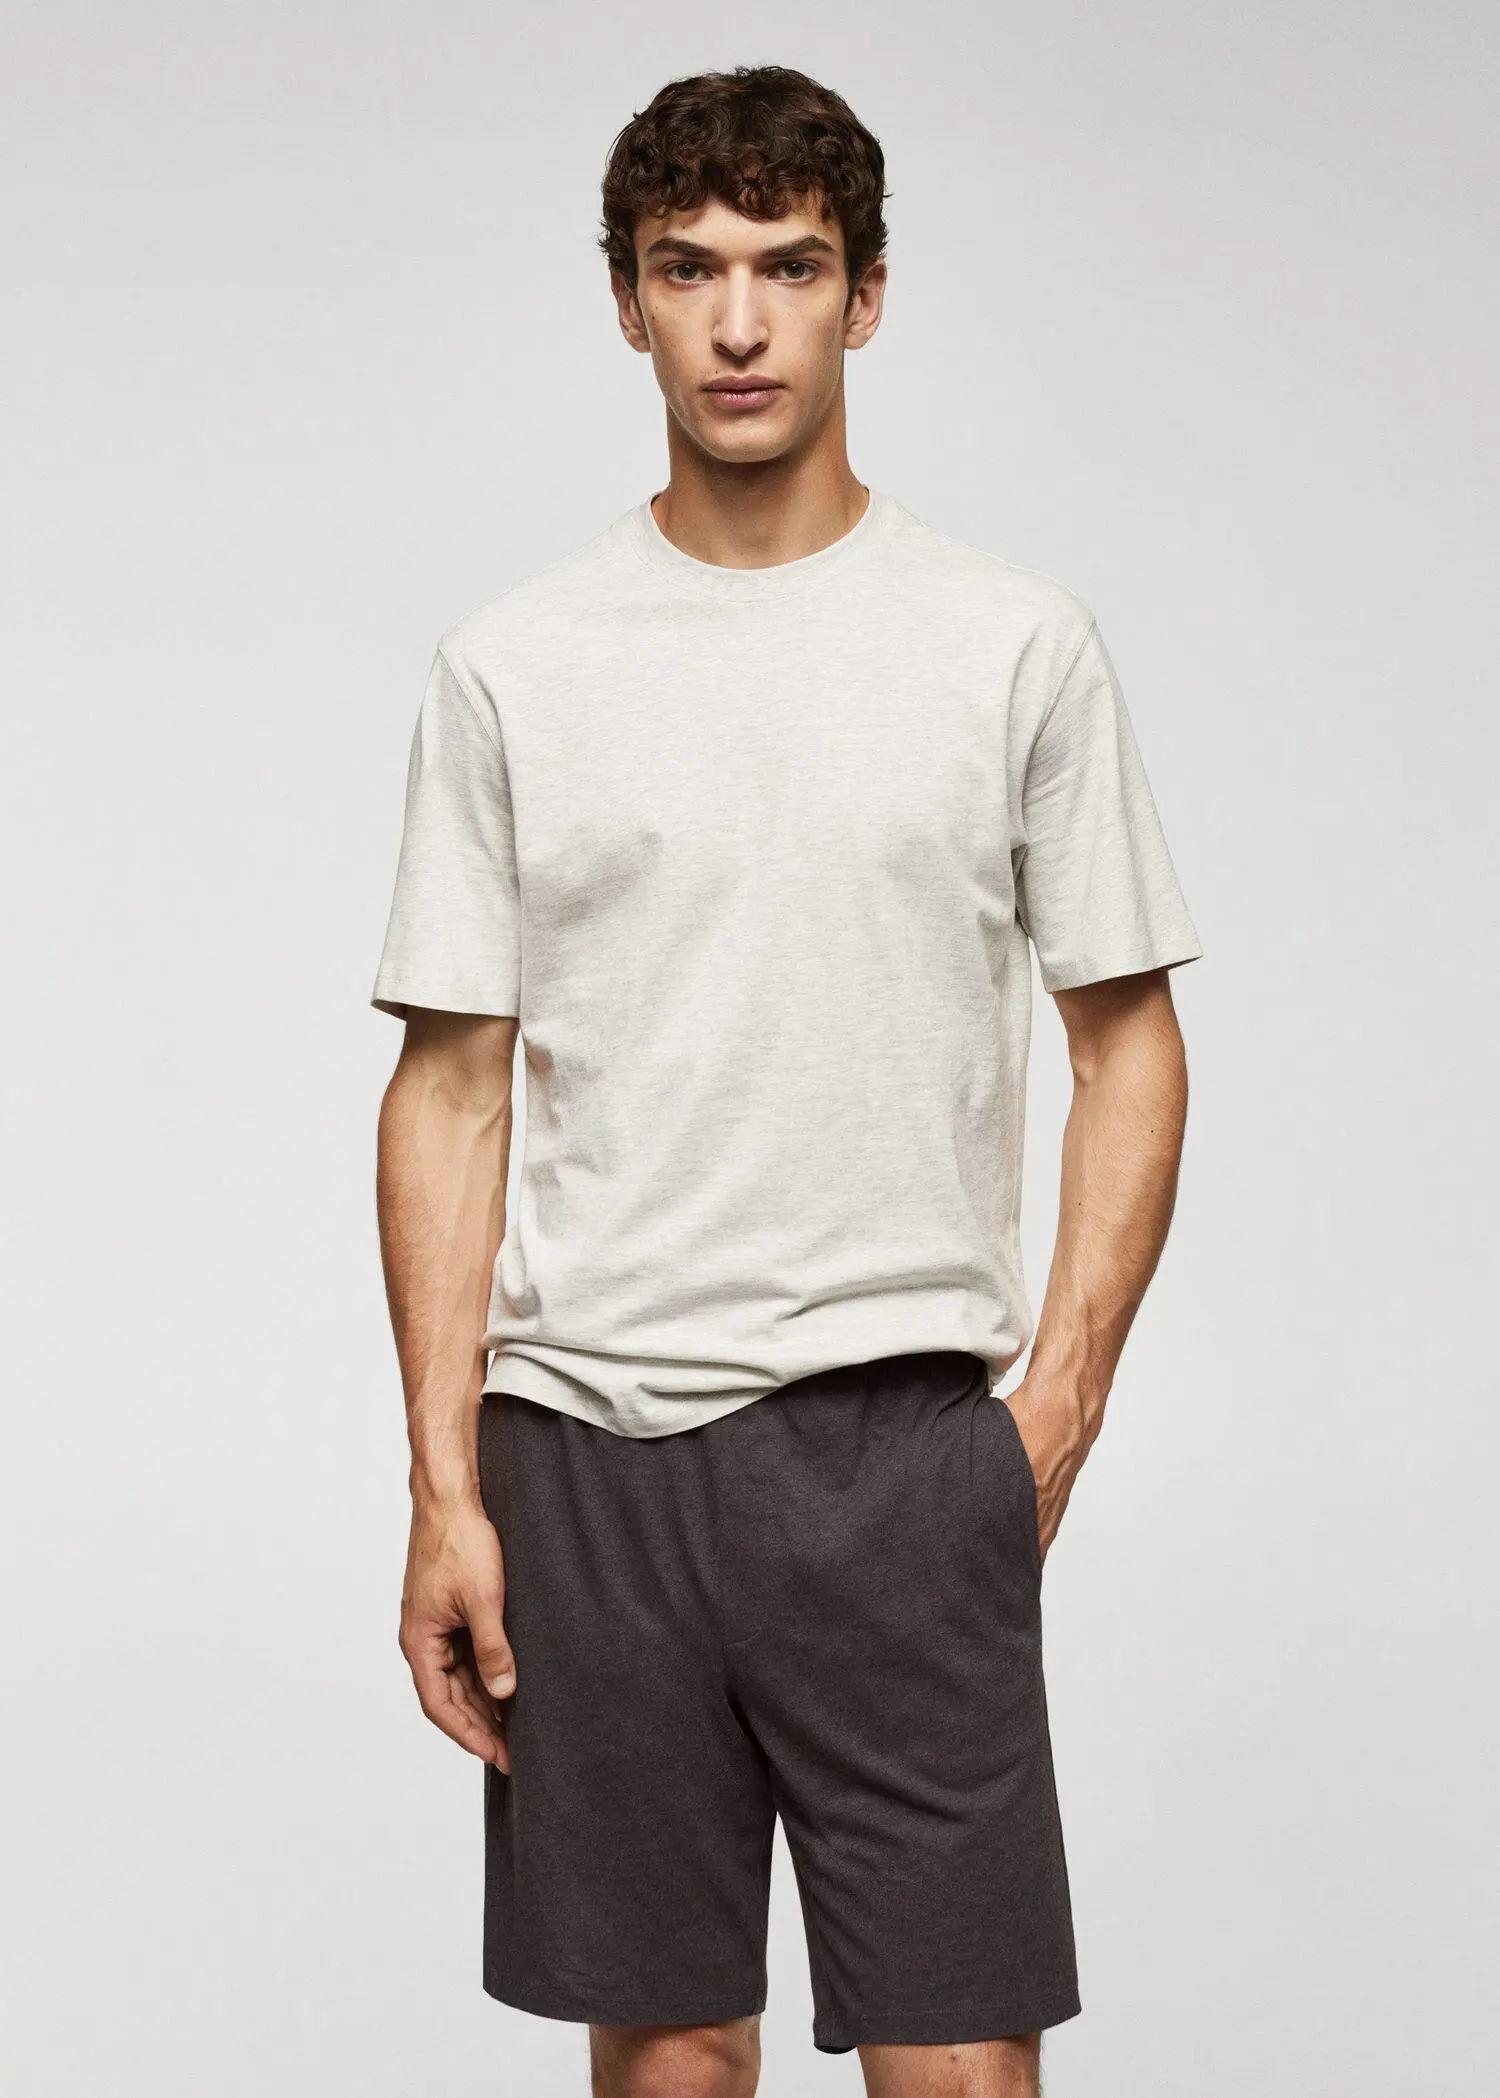 Mango Cotton pyjama shorts pack. a man in a white t-shirt is standing with his hands in his pockets 